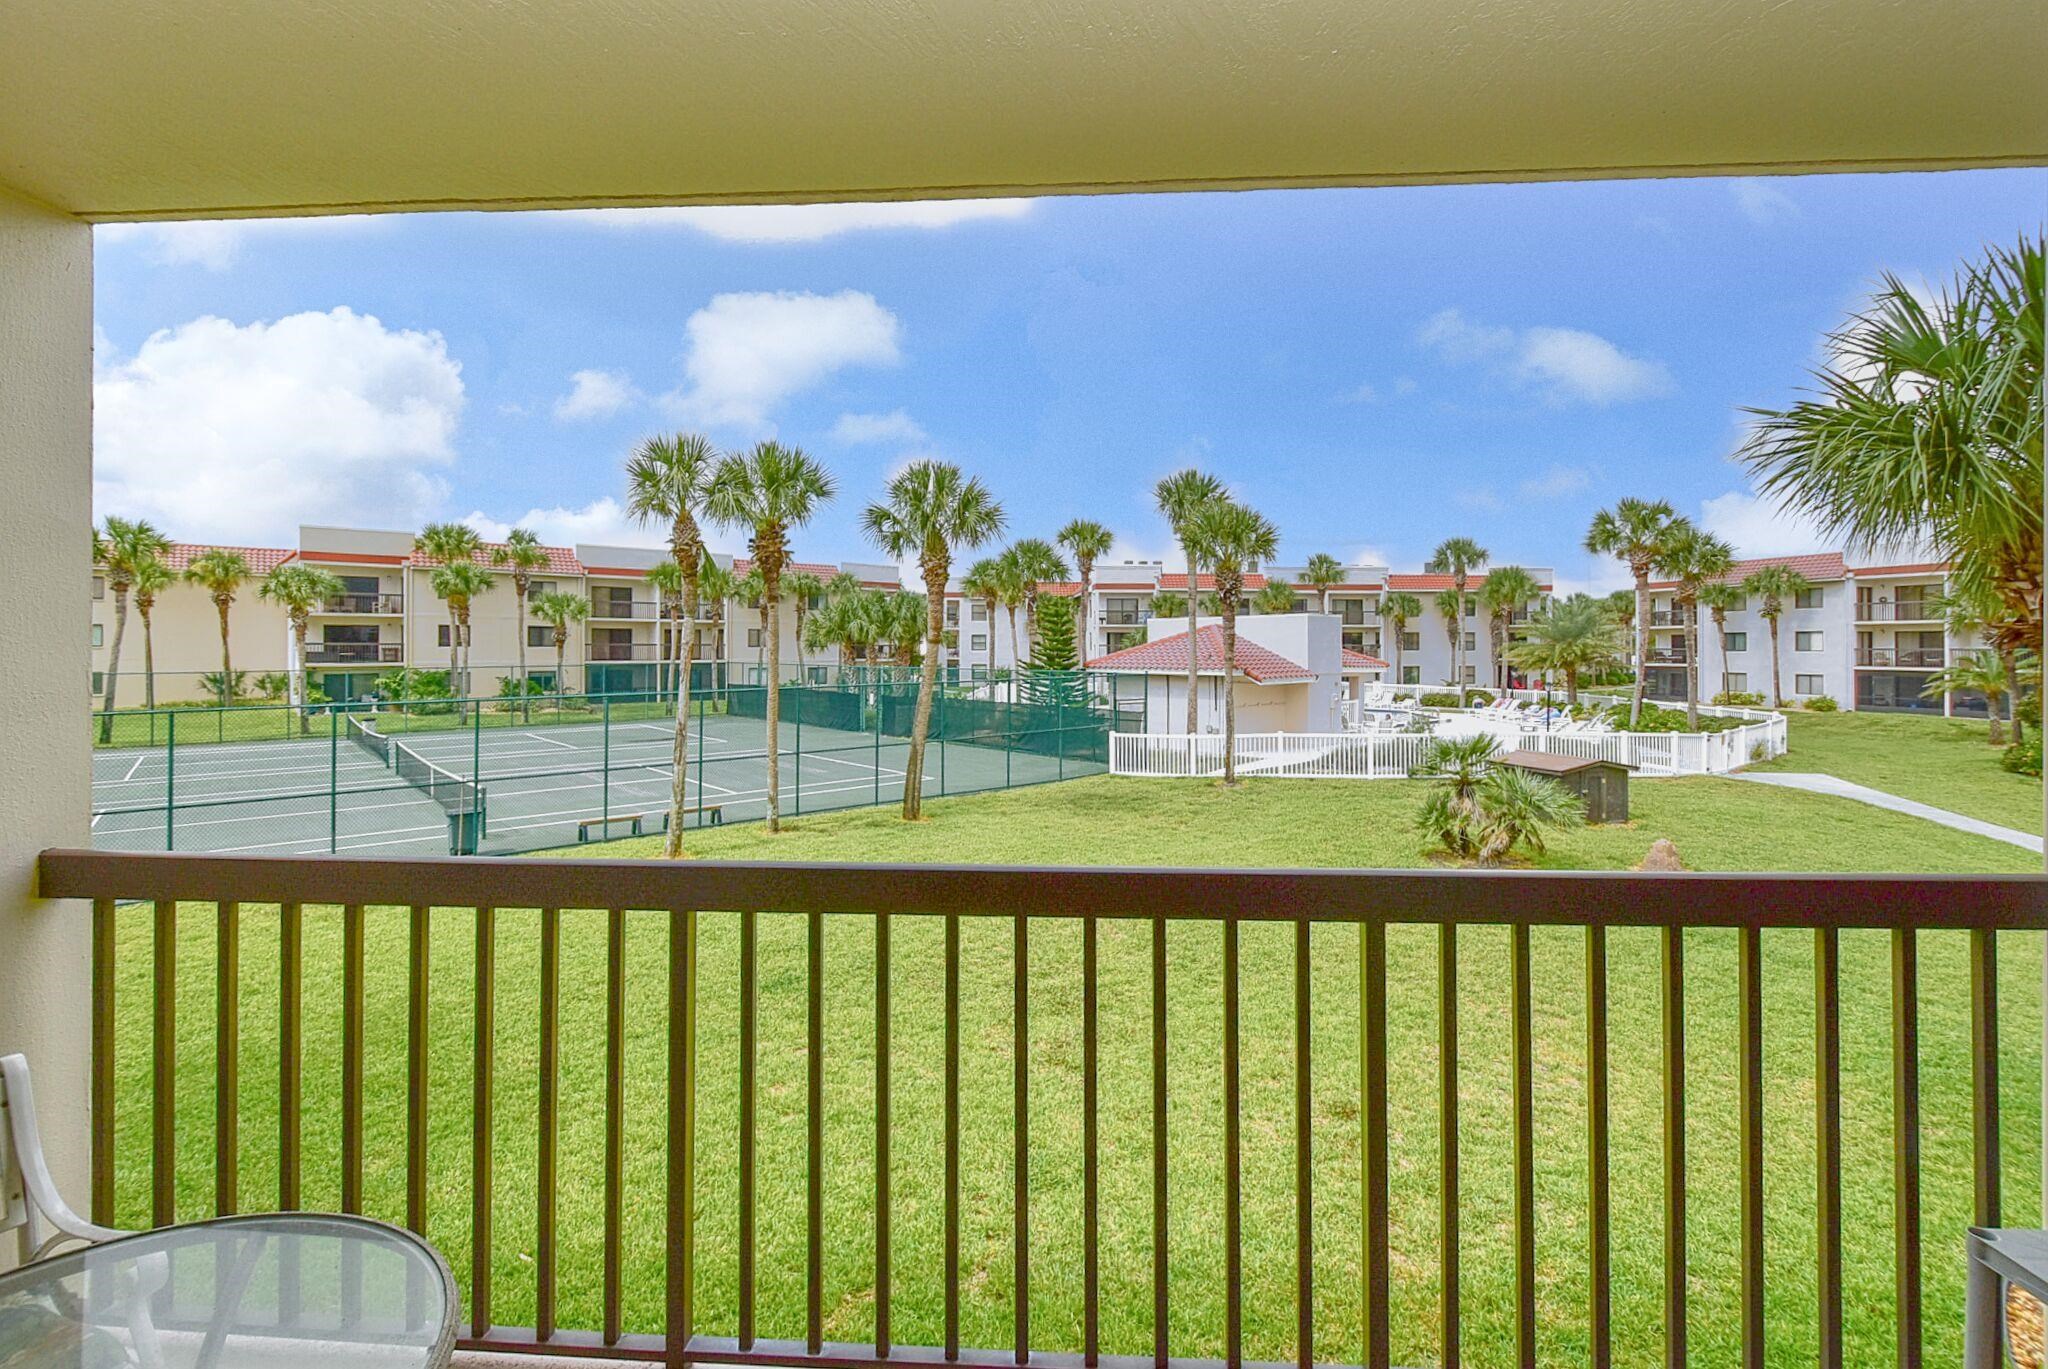 Light and Bright Beach condo ready to be your home, second home or vacation rental. Wonderful views of the heated pool and tennis courts from the lanai. Being sold fully furnished, with vinyl plank flooring through out, New Kitchen Cabinets, granite counters and stainless appliances and furnished in Beachy Decor.  Ocean Village Club is a beautiful gated Ocean Front Community with great amenities. This unit is steps to the heated pool, ocean front pool and the Beach Access. Enjoy the pools, clubhouse with fitness center, picnic area, shuffle board, or spend your time relaxing on the famous sugar sand beach. Conveniently located near the back gate of the complex. A short drive to Historic Down town St Augustine and the tourist attractions, restaurants and shopping near by. Great Location to enjoy  All St Augustine has to offer